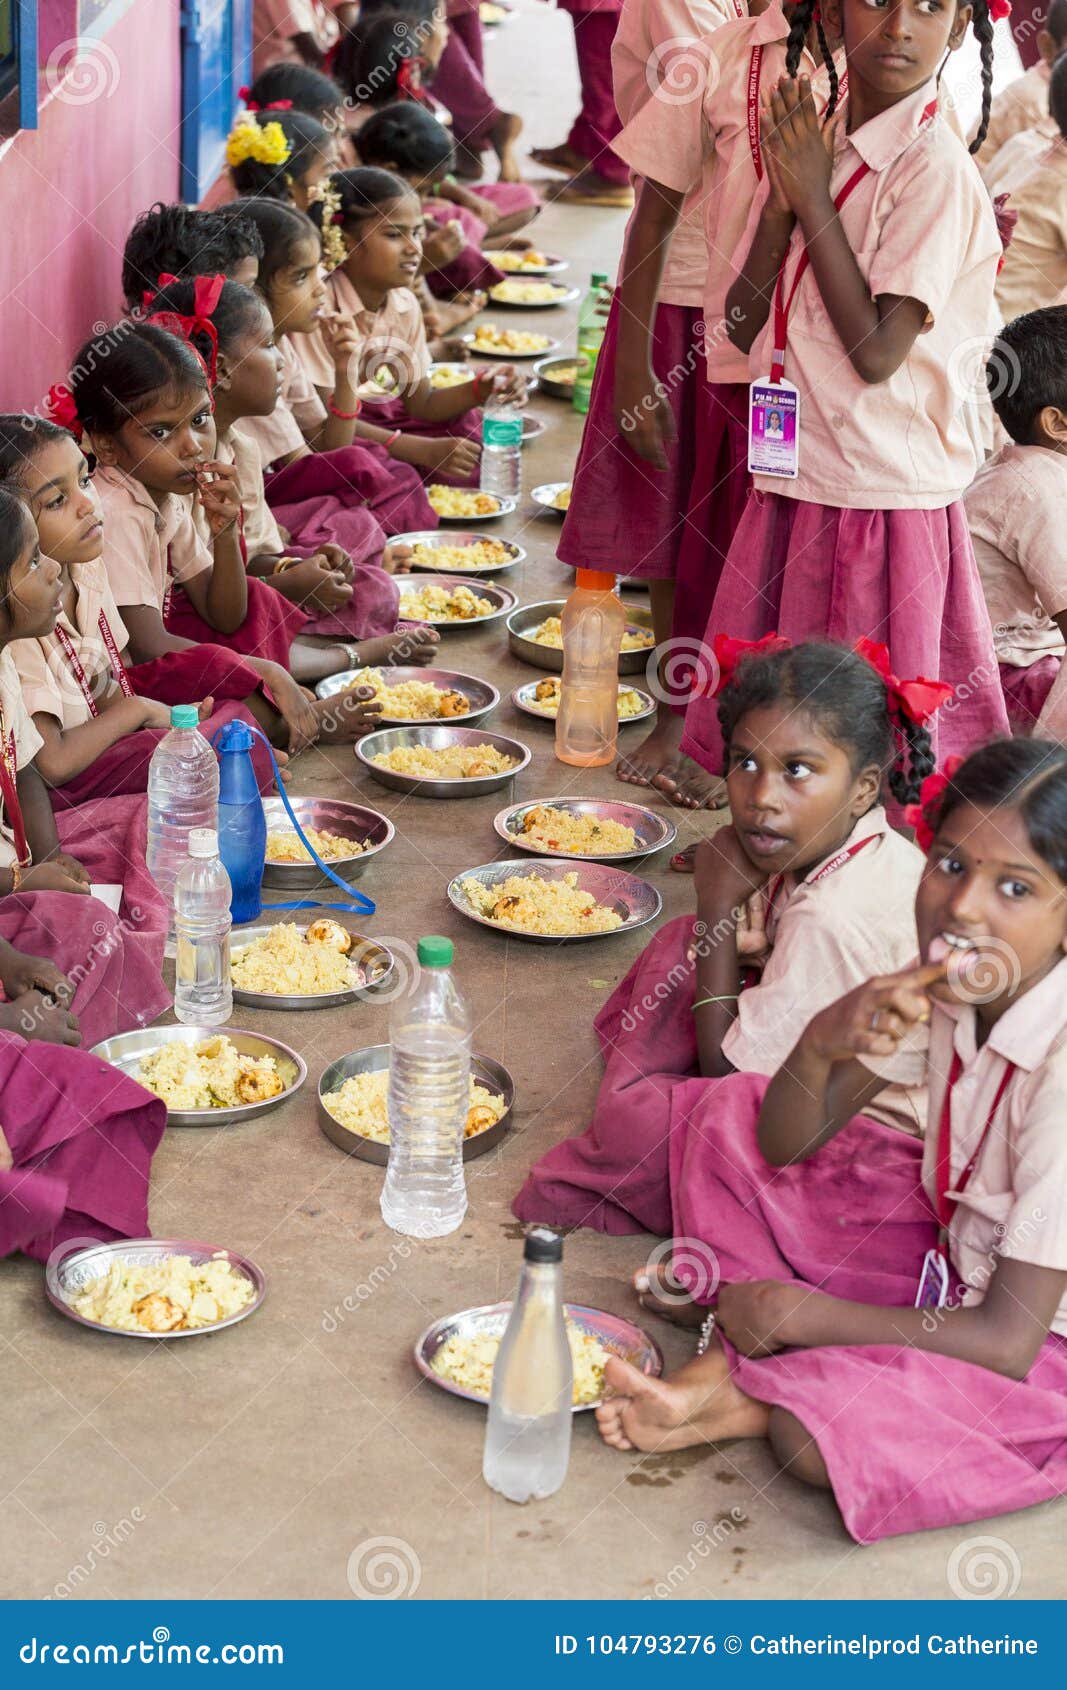 https://thumbs.dreamstime.com/z/documentary-editorial-image-unidentified-children-have-their-lunch-canteen-pondichery-puduchery-india-september-104793276.jpg